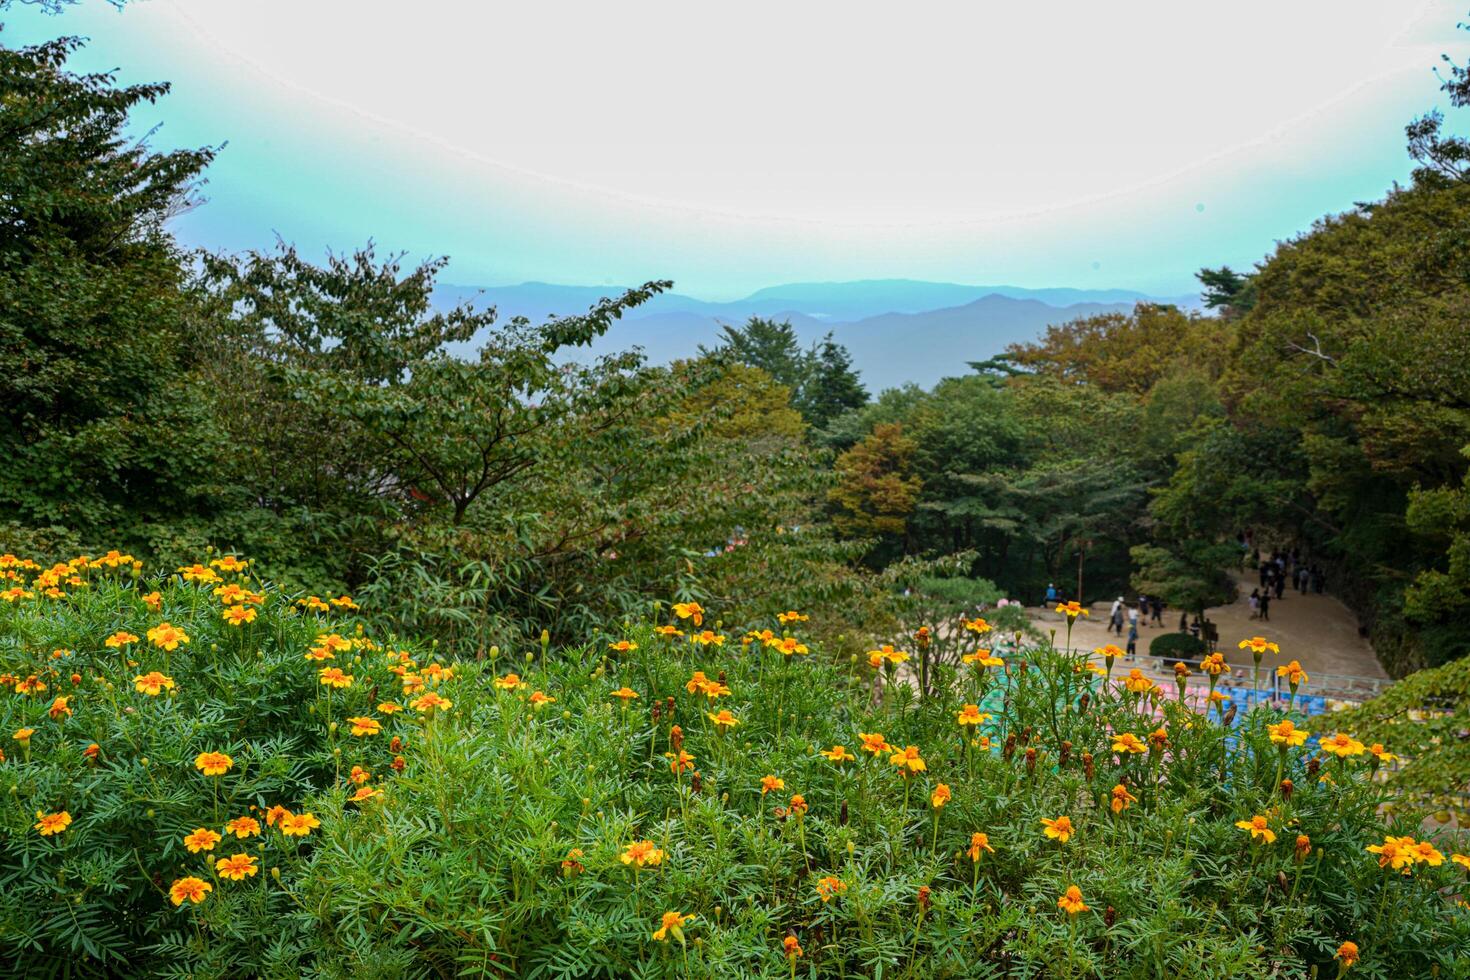 A beautiful scenery on the mountain with fresh flowers and green tree and bleu sky in korea gyeongju heritage park photo